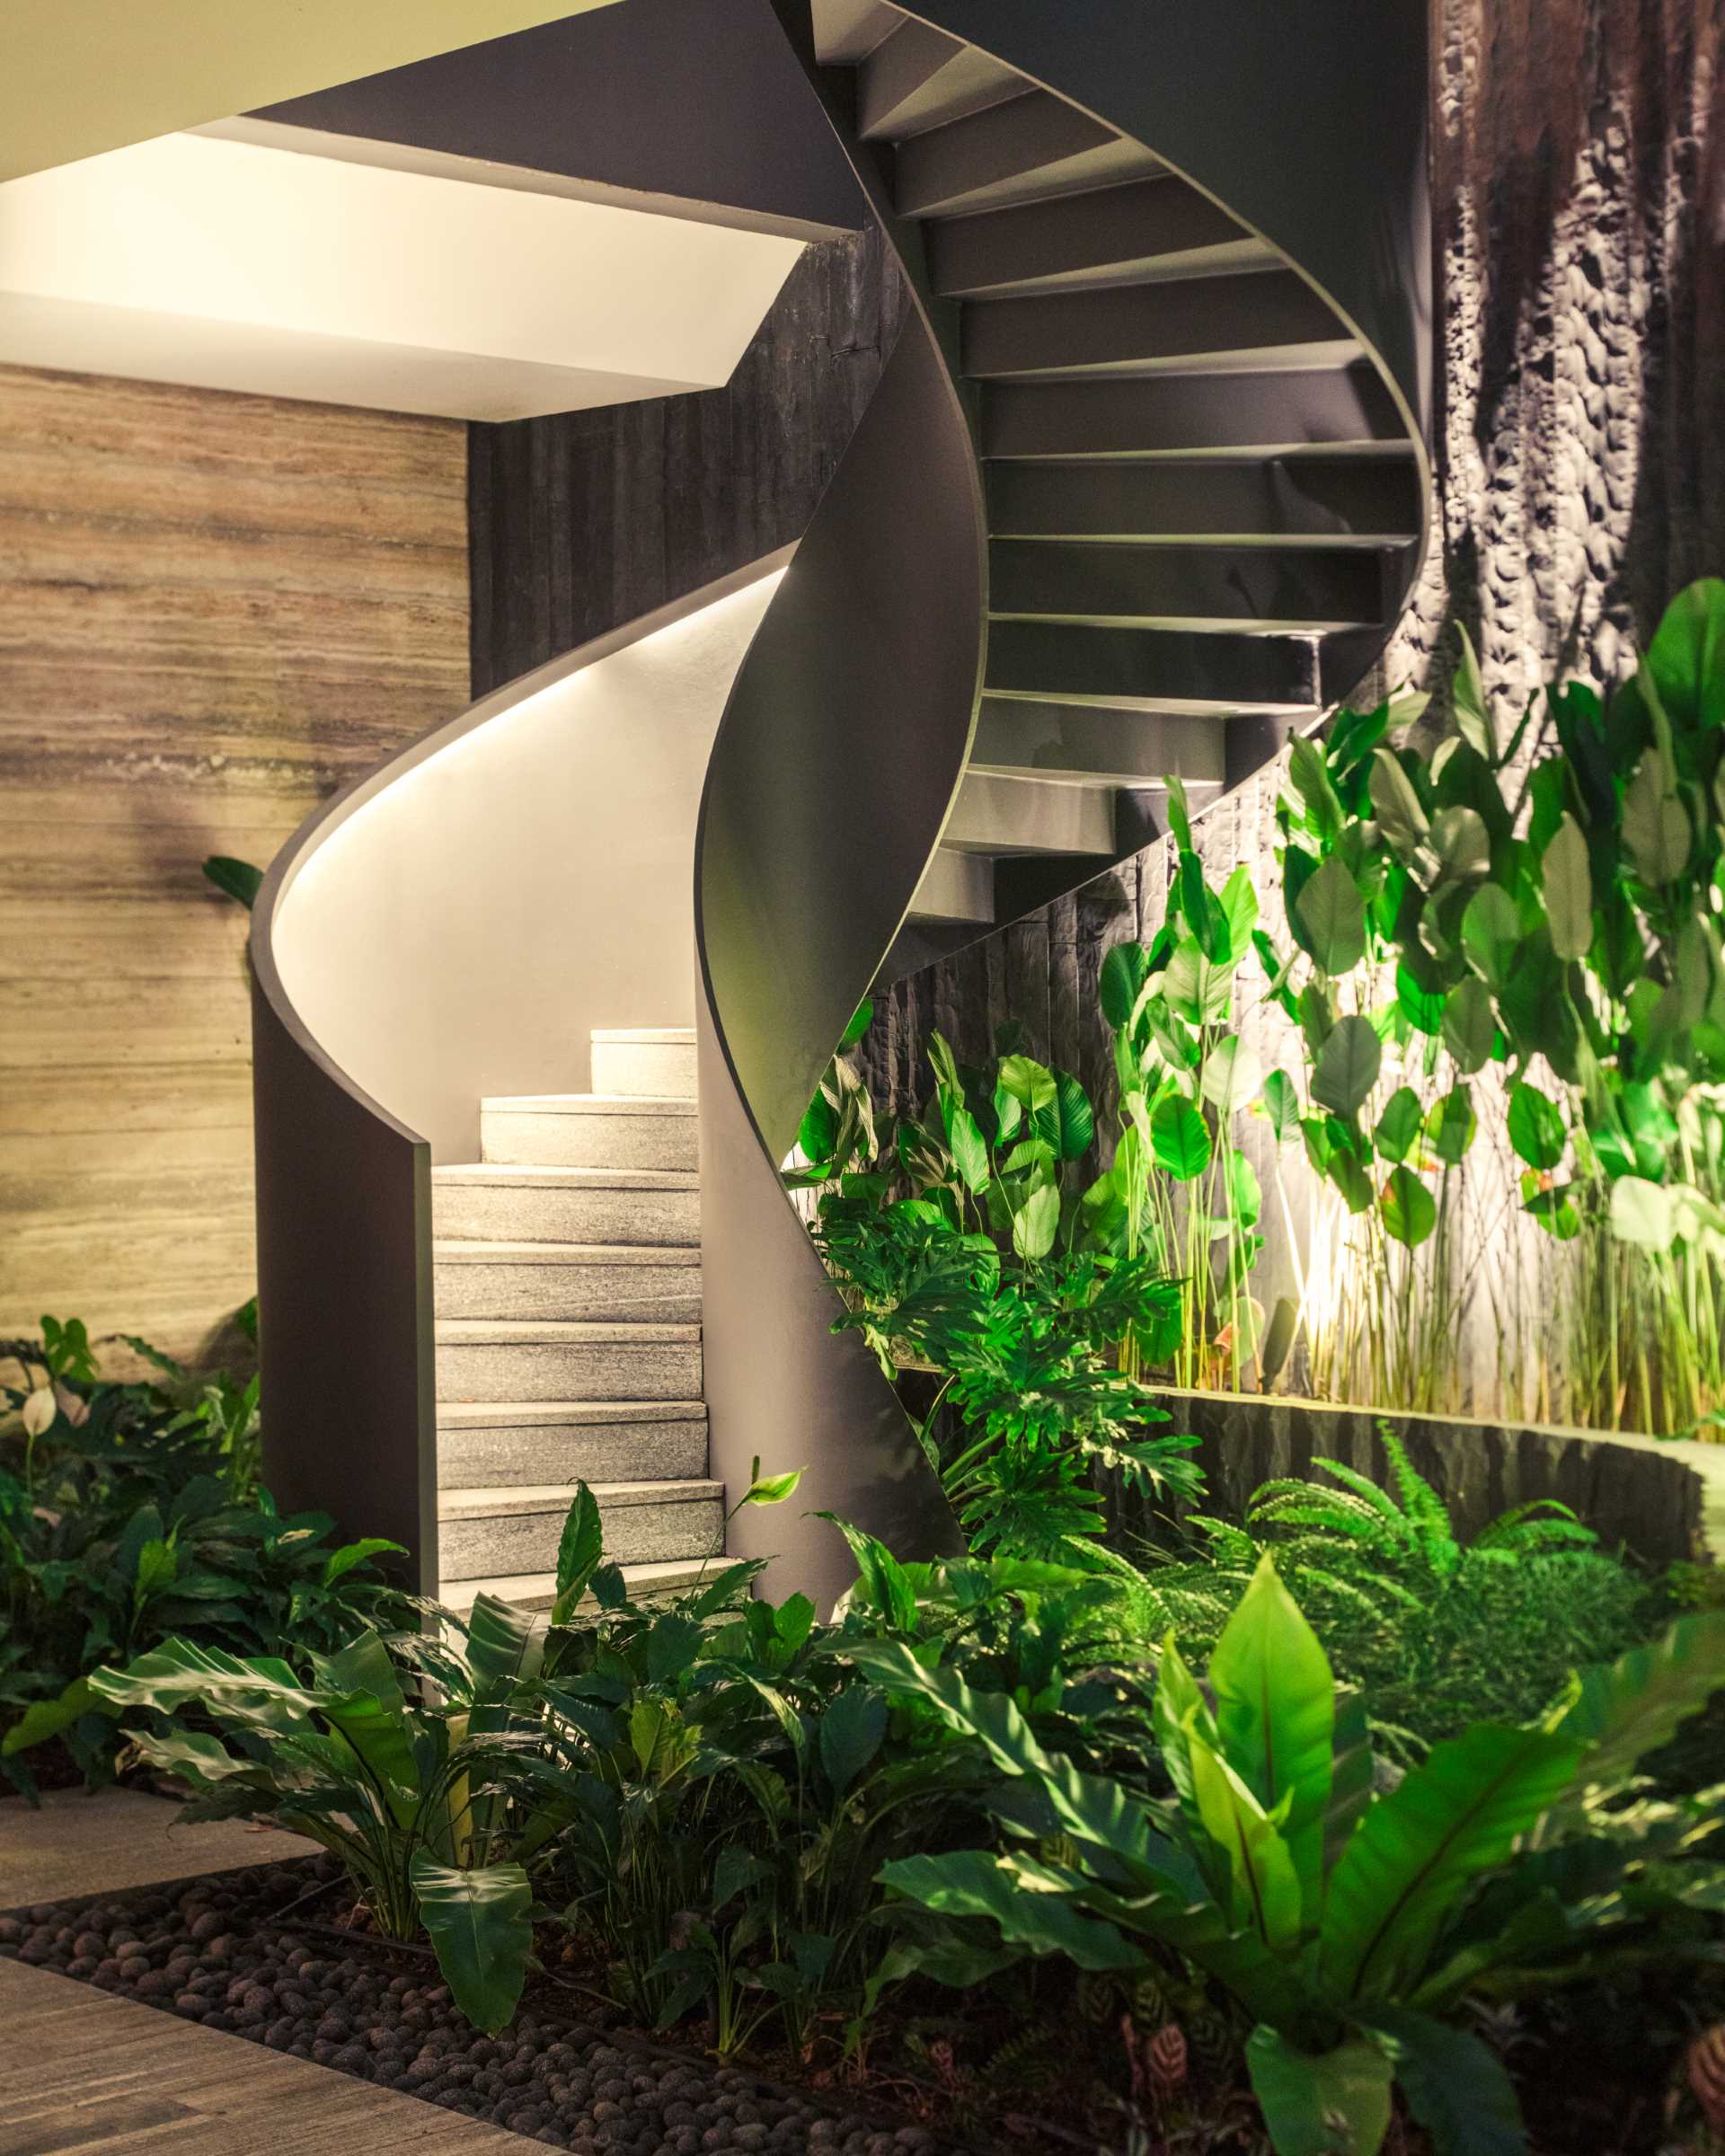 A modern home with external spiral stairs that's surrounded by plants.